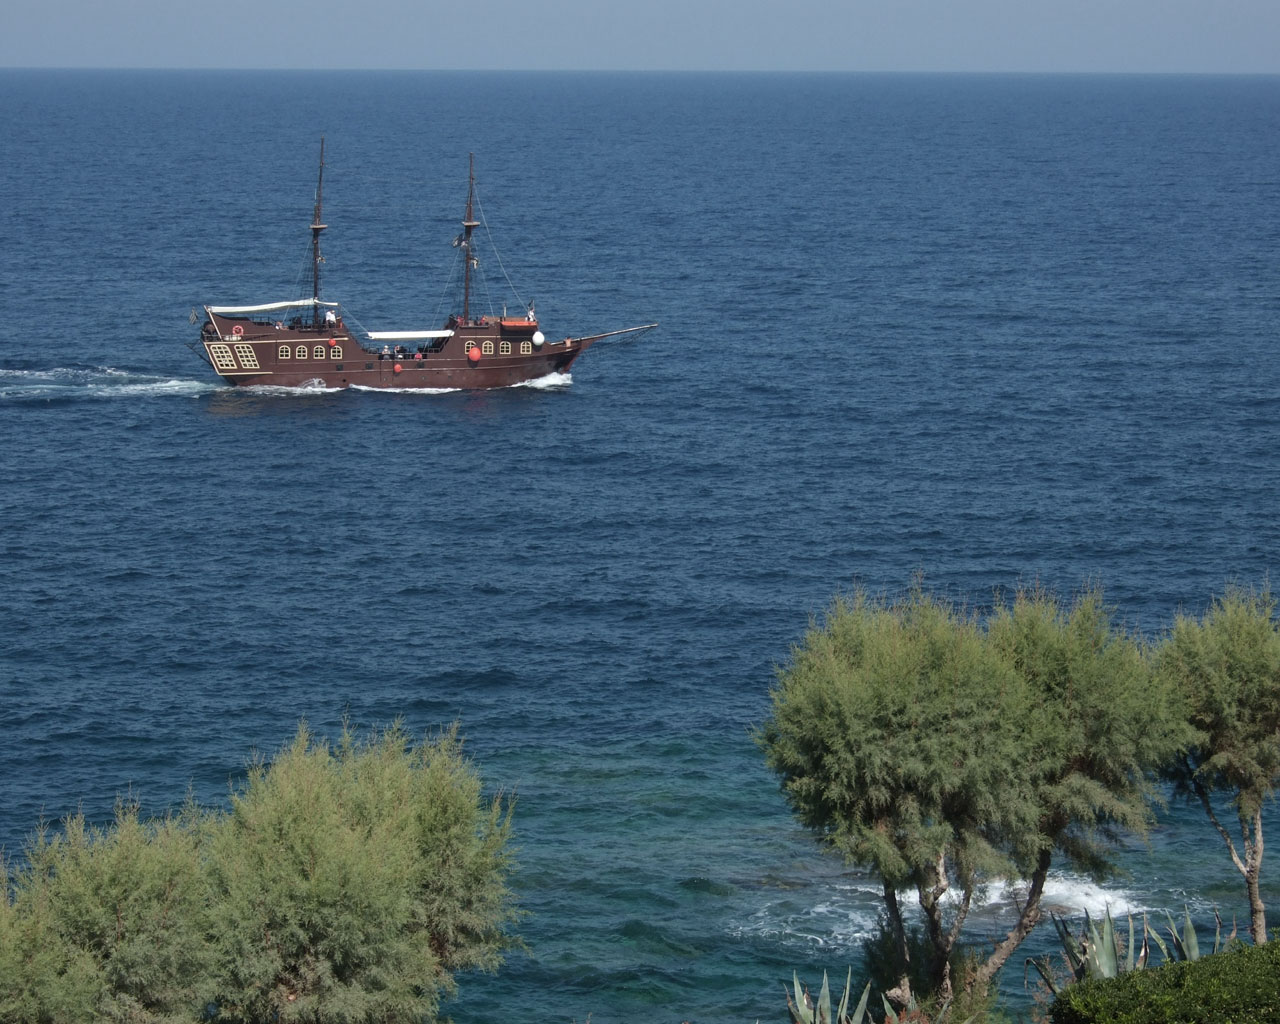 An old fashion pirates boat
      on the blue sea.